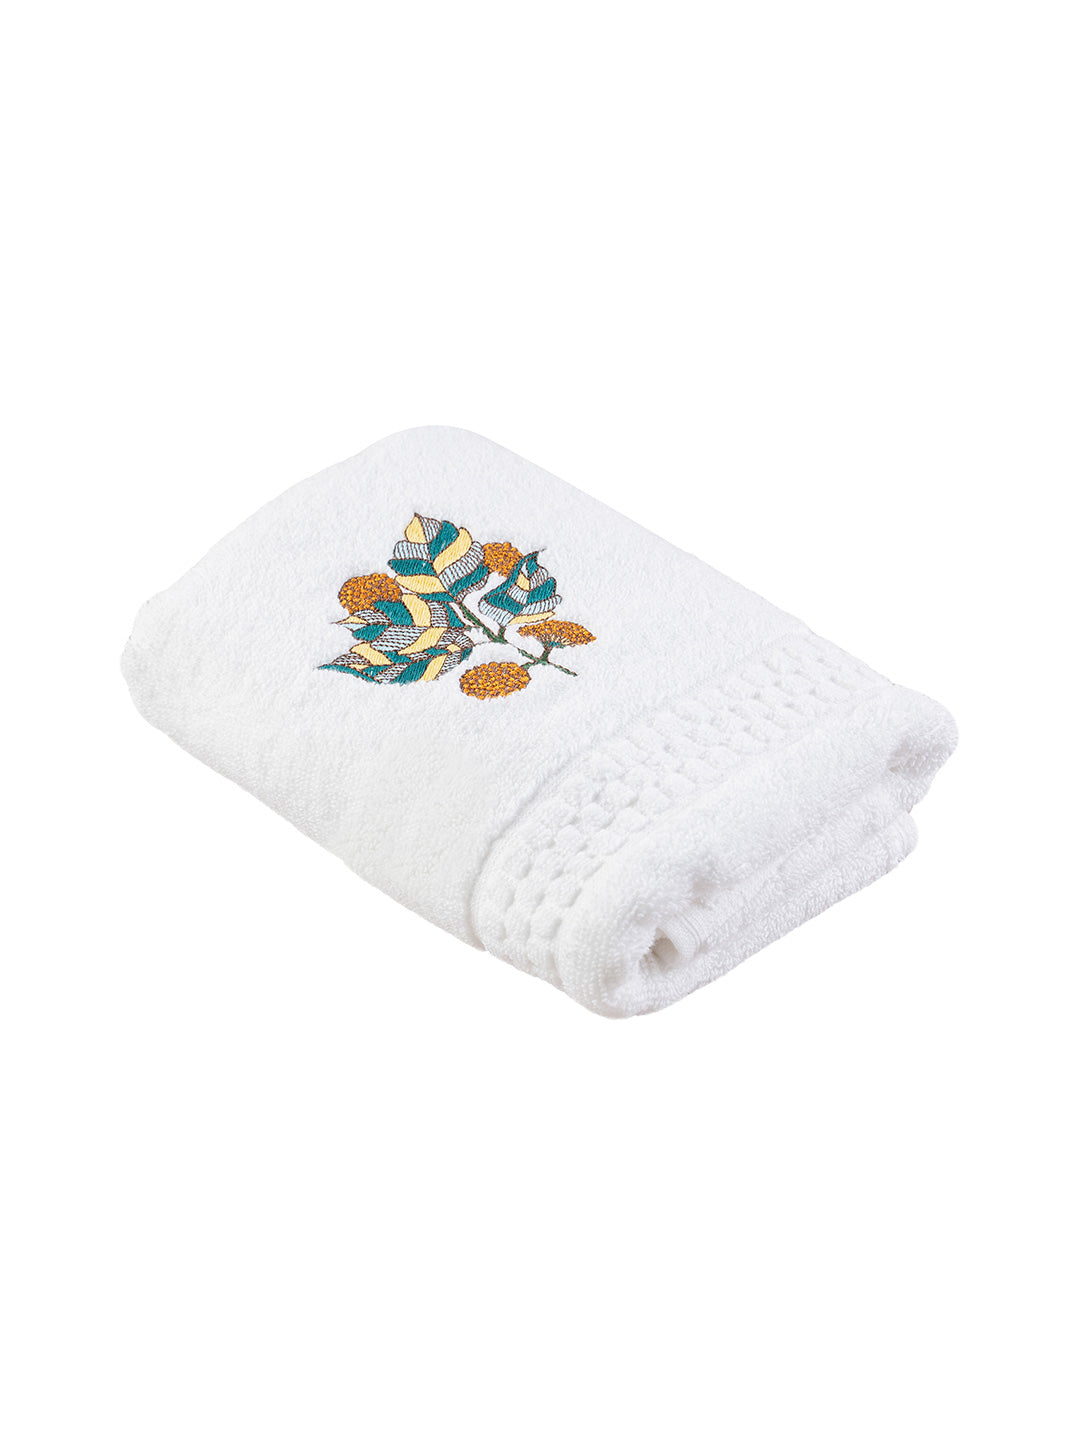 Hand Towels - Floral Gold Embroidered Gift Set